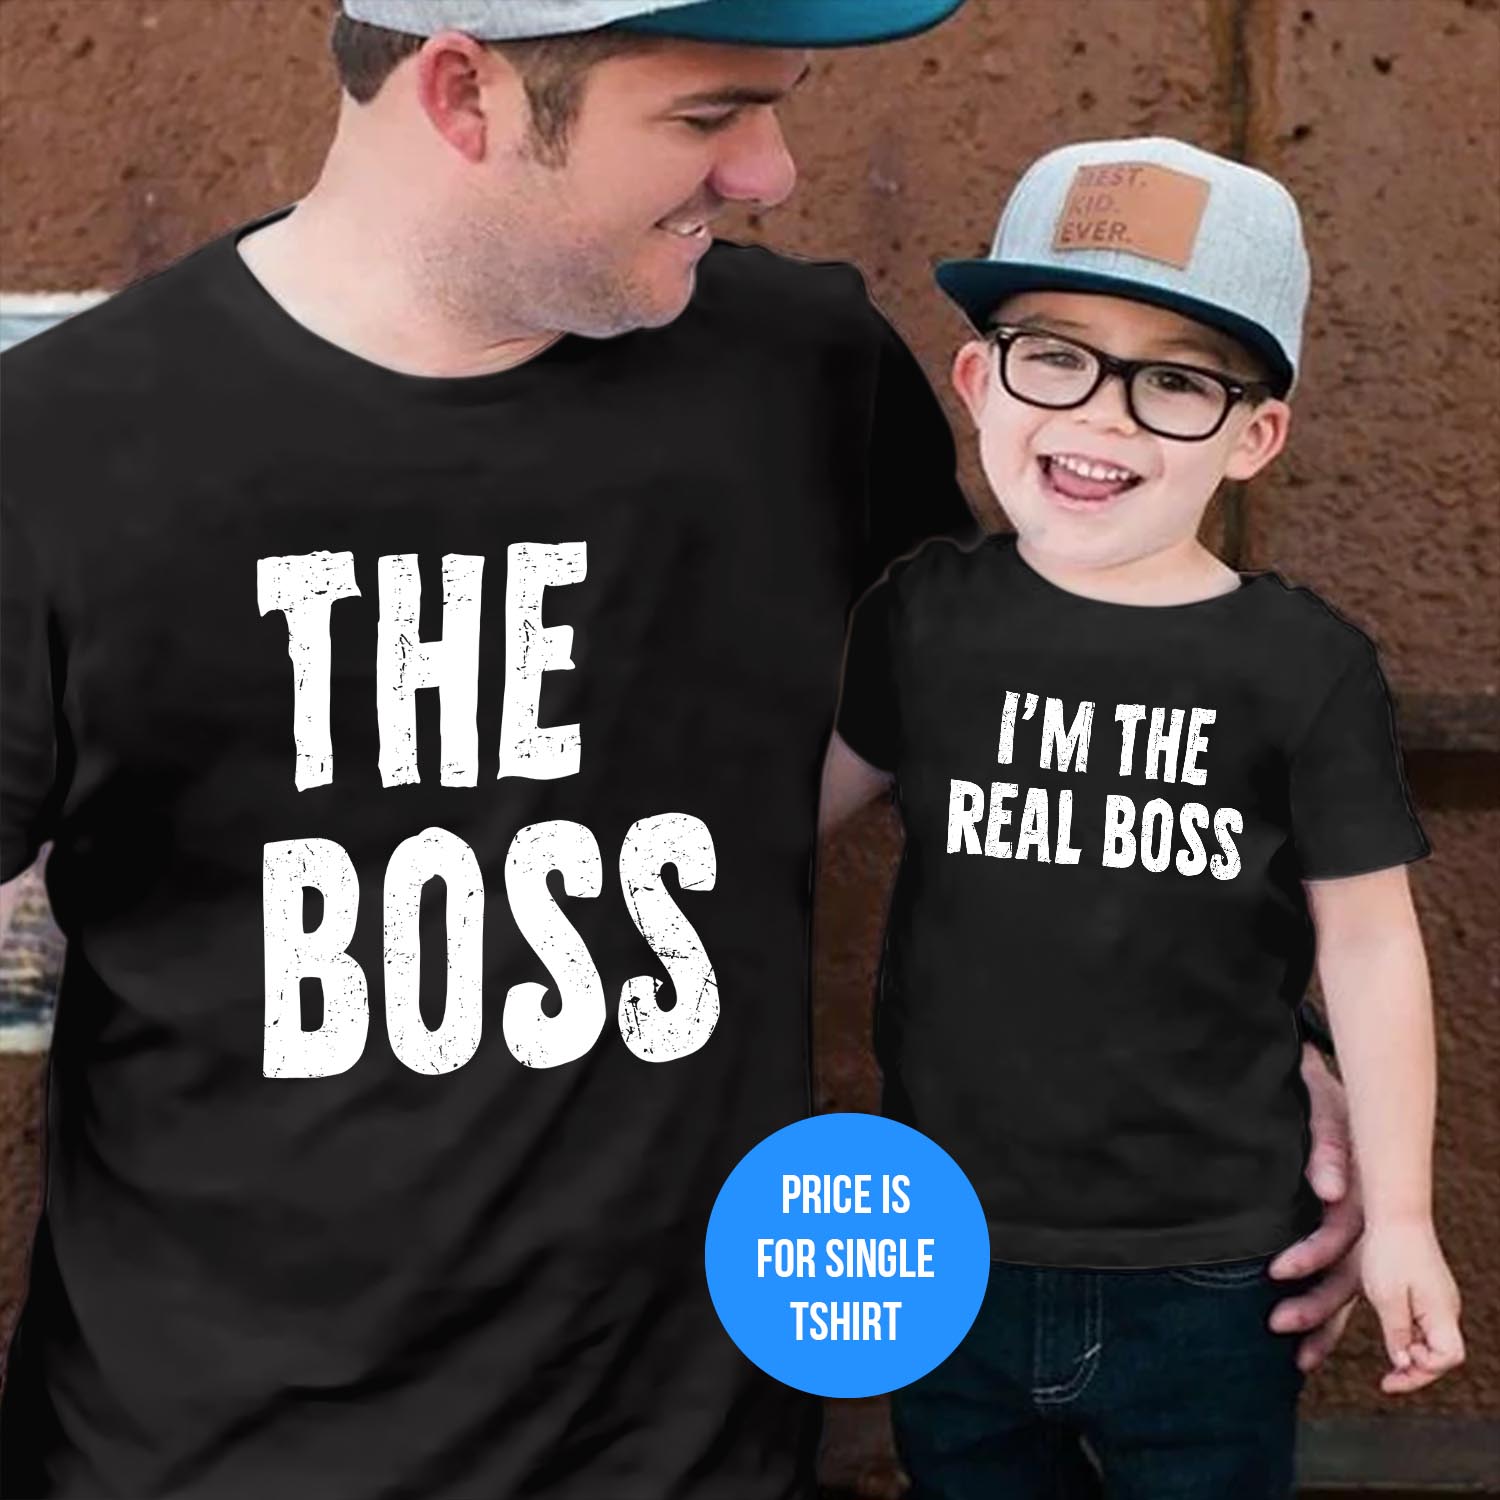 The Boss The Real Boss Father's Day T-Shirt Dad Son Daughter Family Matching Shirt Tops Set Funny Dad Birthday Fathers Day Gift T Shirt